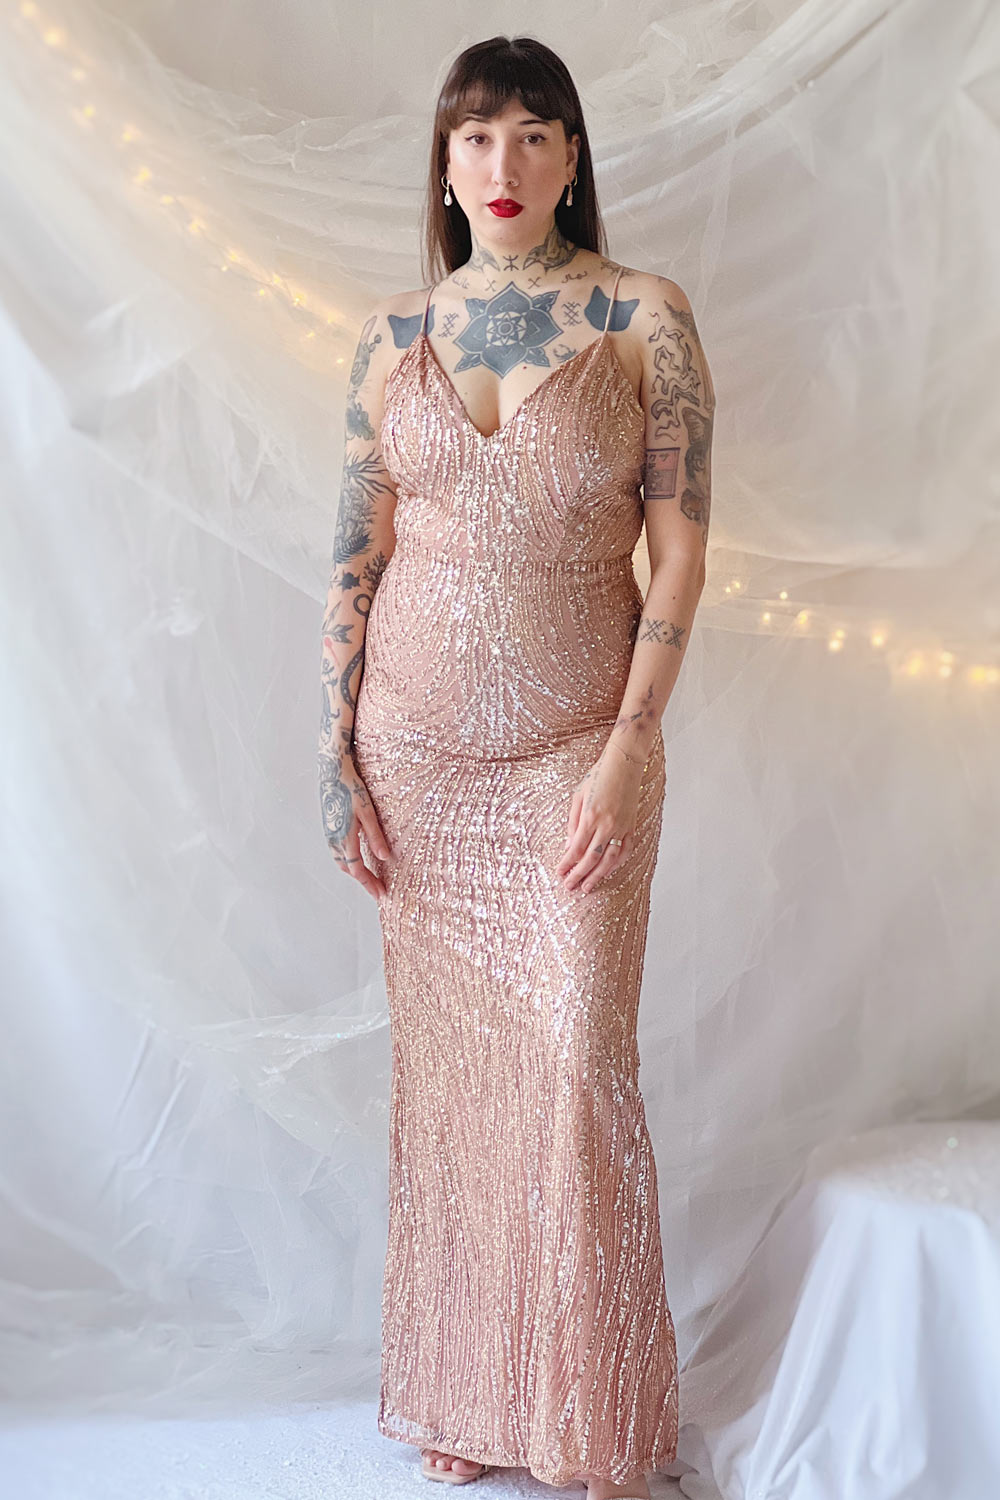 Silver Sequin Maxi Dress Long Sleeve, Floor Length, Sexy For Summer Parties  Style 210415 From Bai03, $23.62 | DHgate.Com